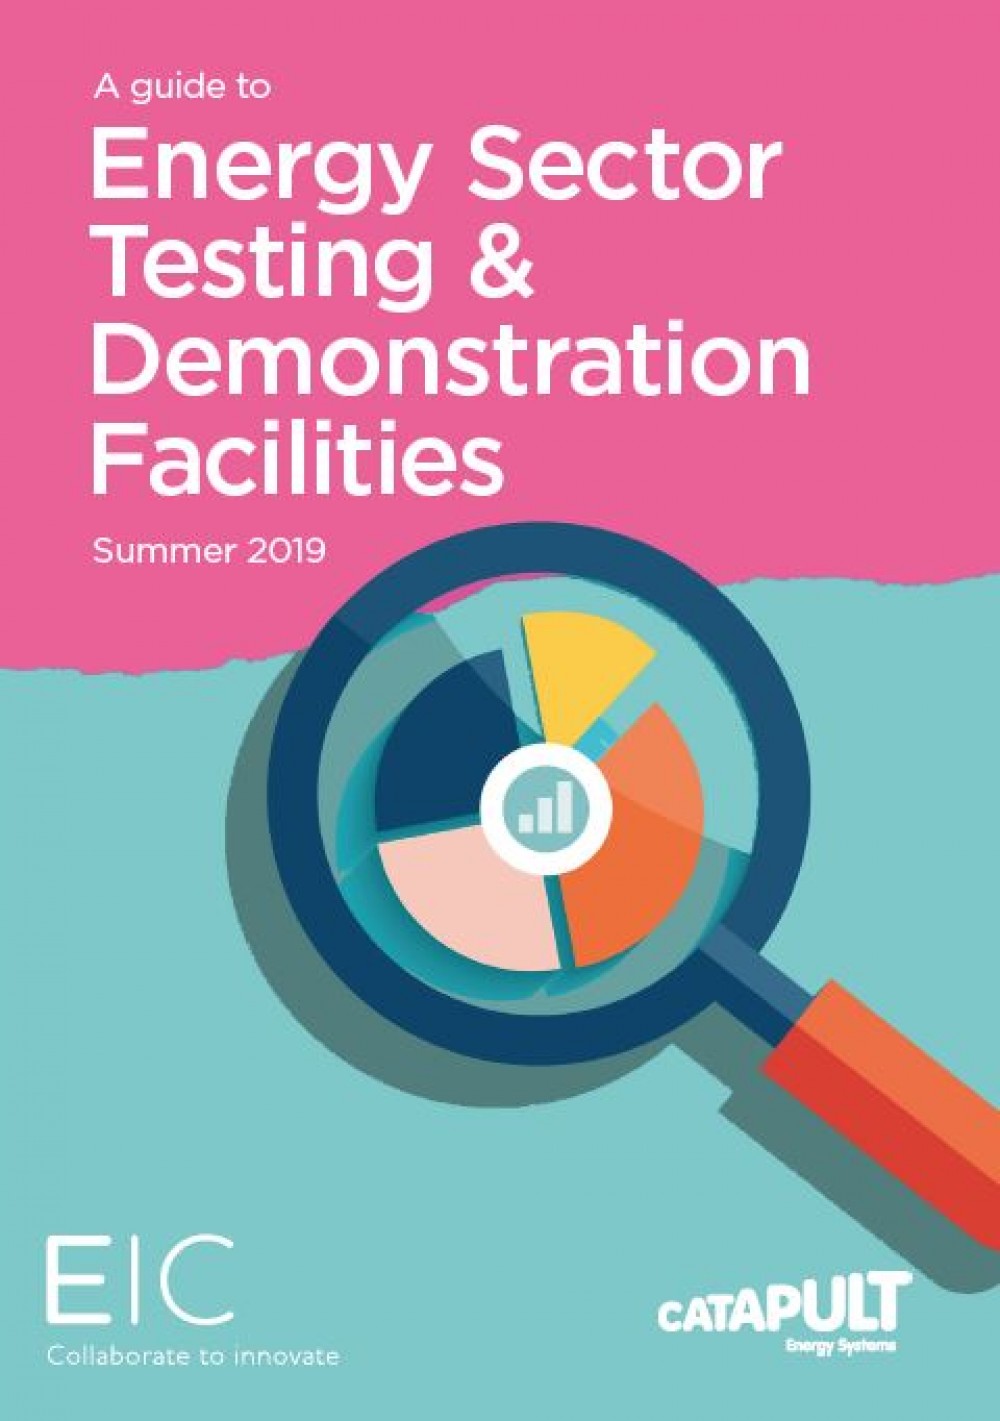 JUST LAUNCHED: Updated ‘Energy Sector Testing & Demonstration Facilities’ guide Summer 2019